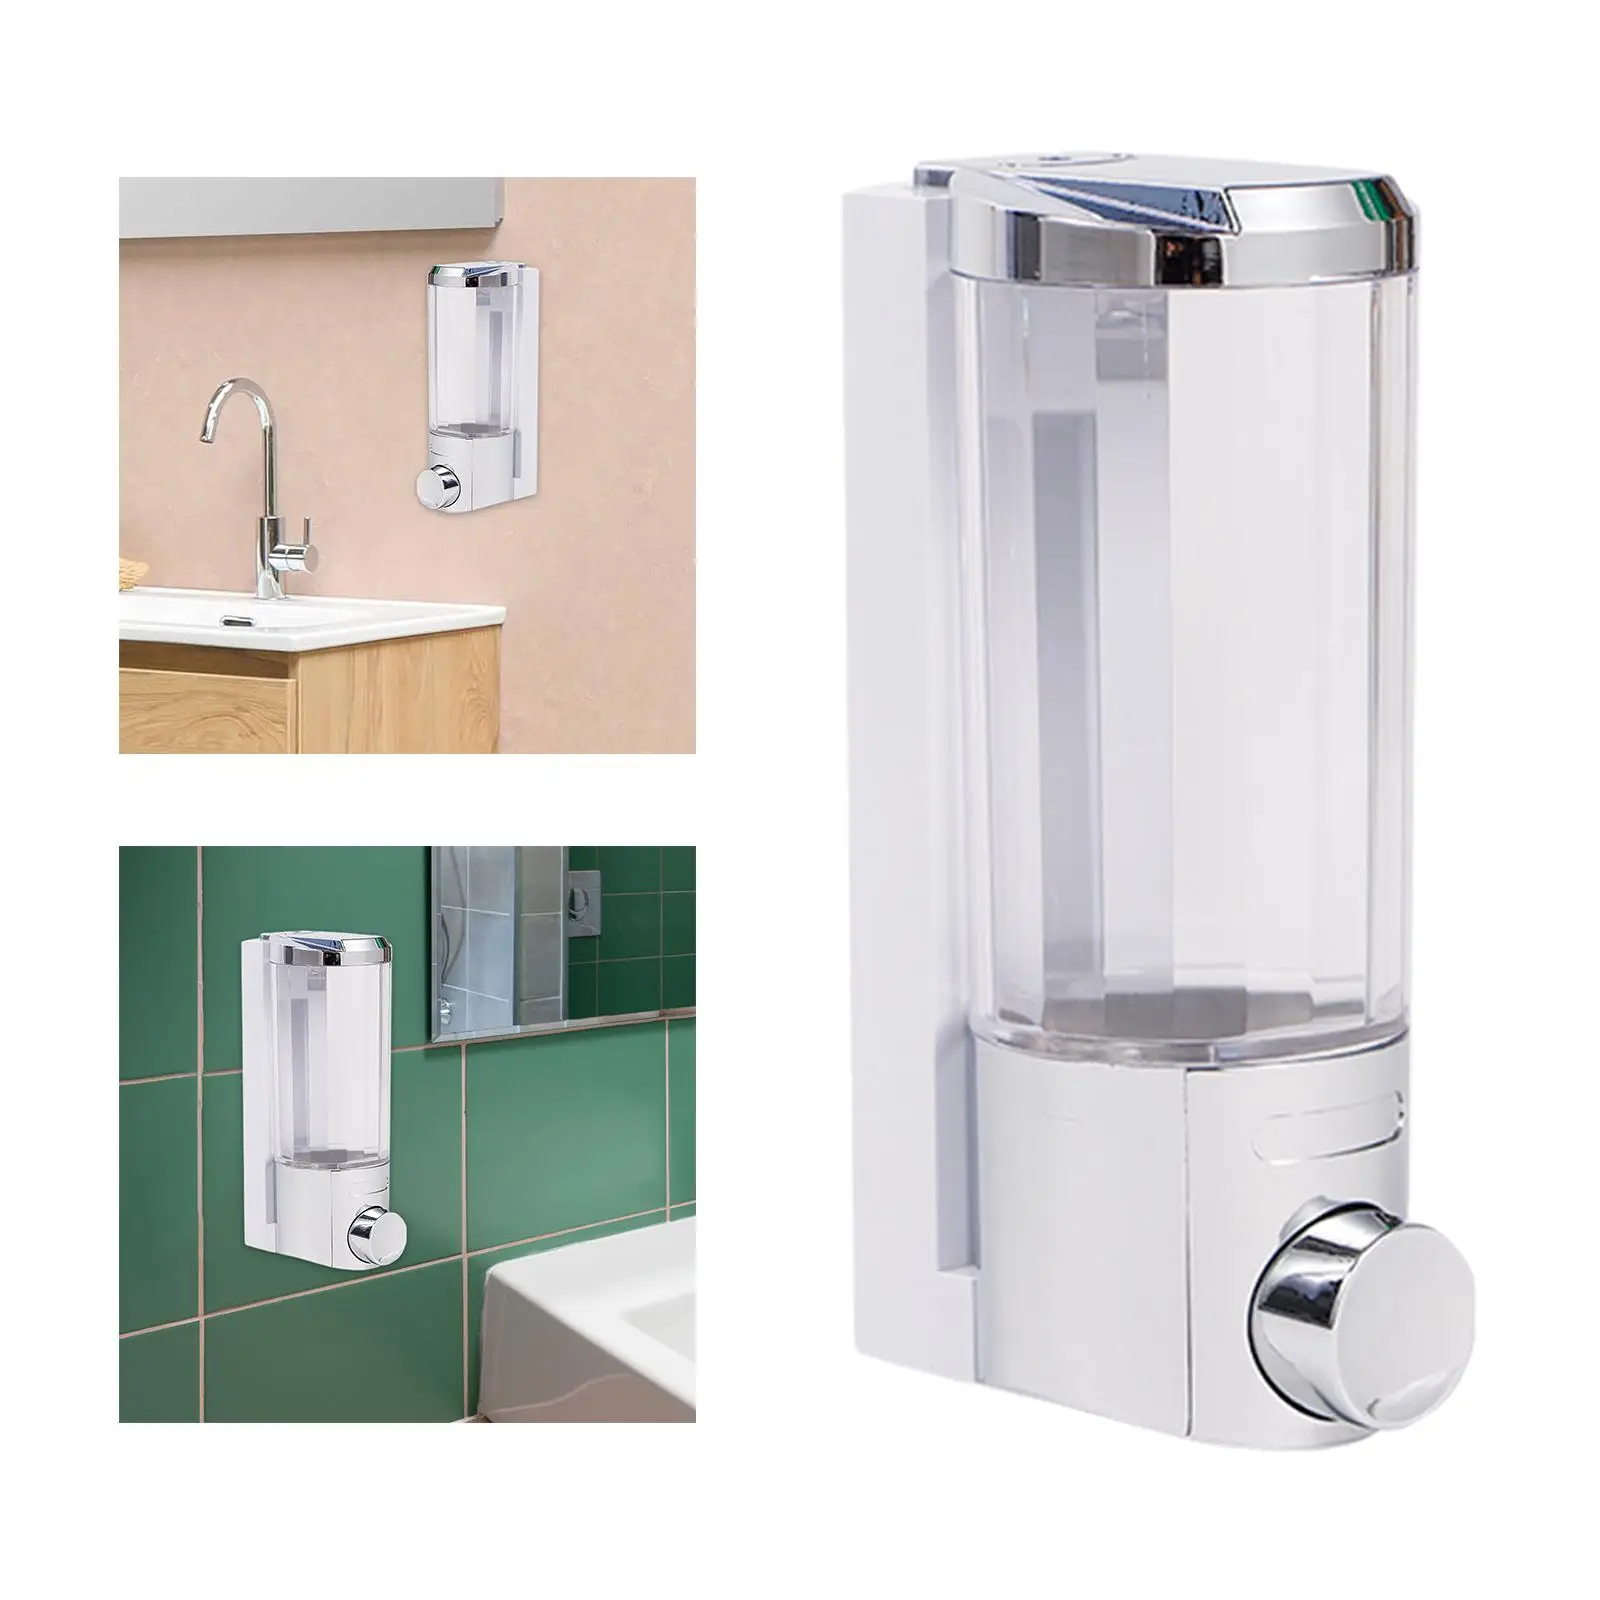 Wall Mounted Manual Liquid Soap Dispenser Shower Hand Soap Dispenser for Commercial Shower Shampoo Lotion Hotel Office Home